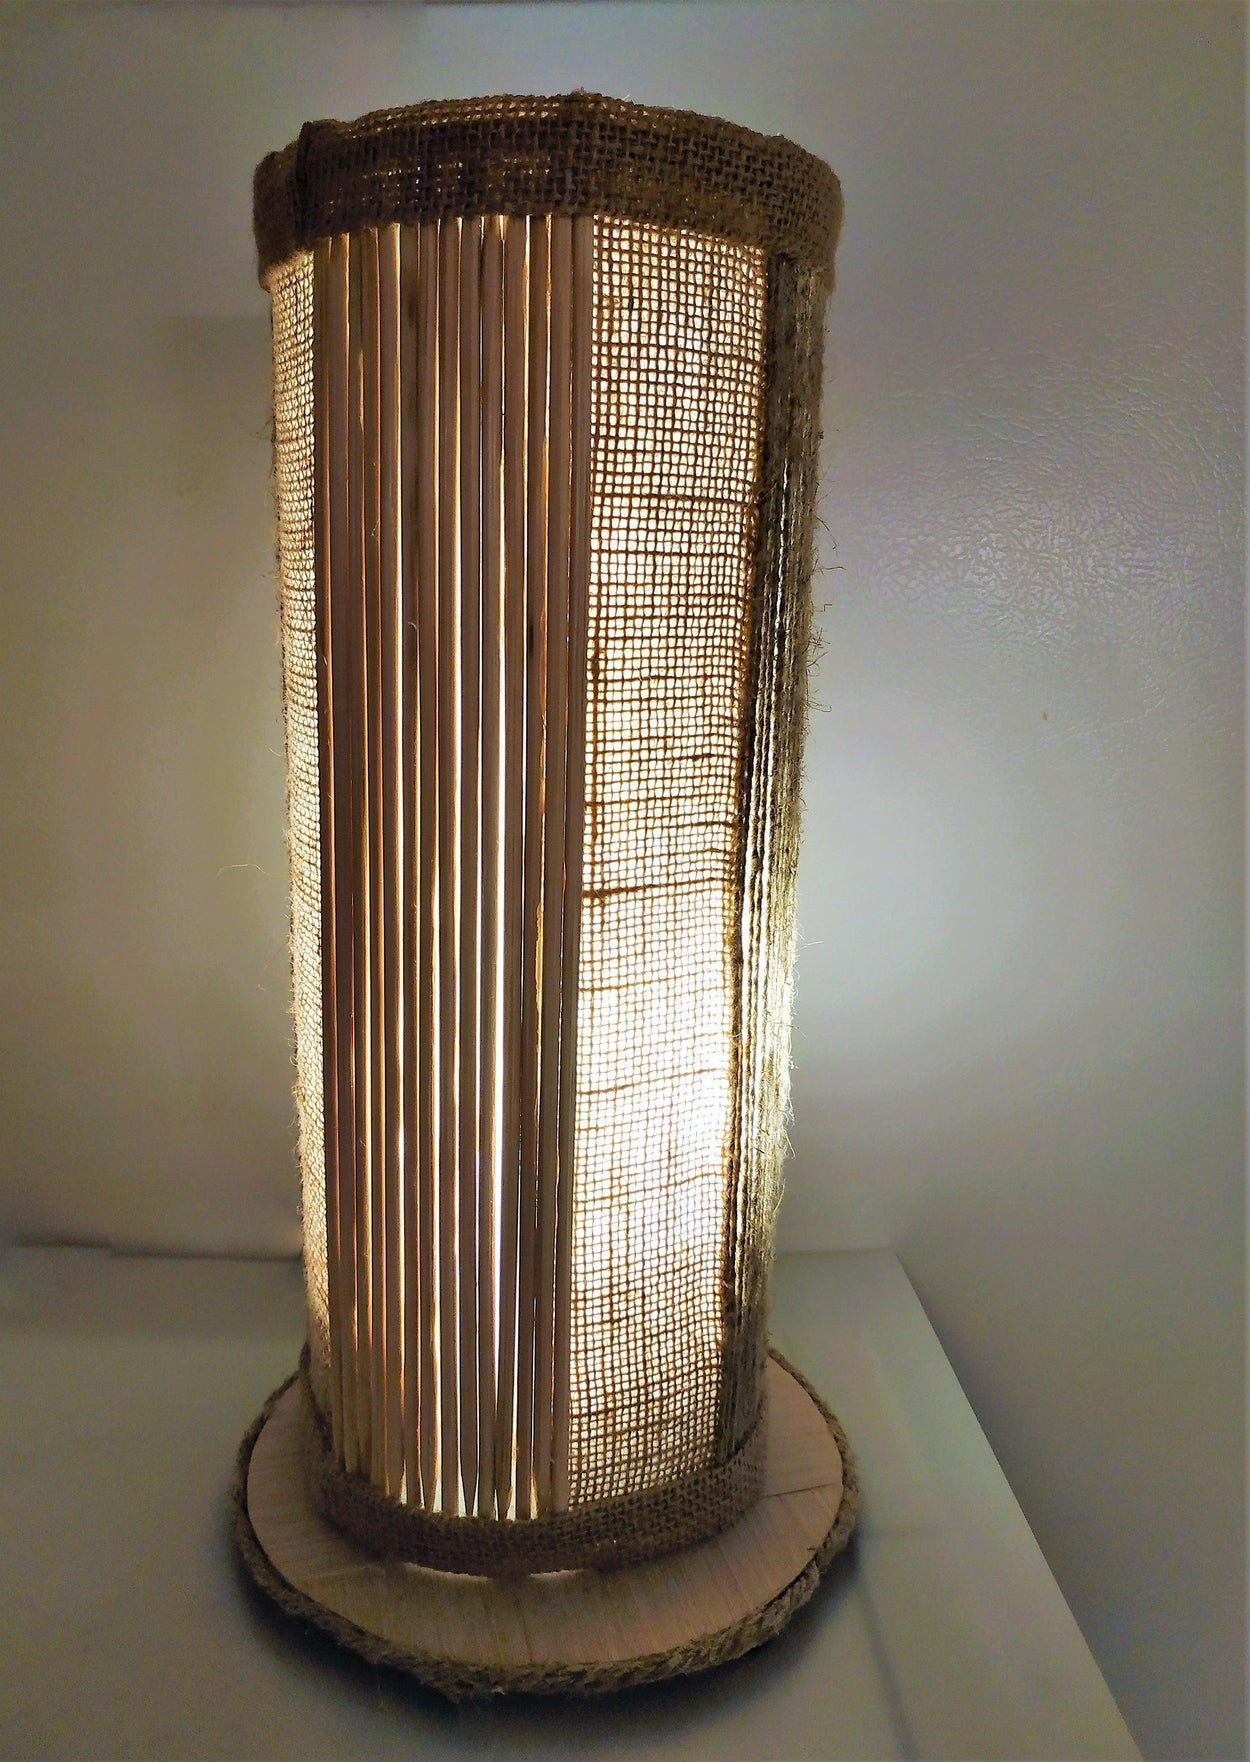 Exclusive Table lamp for bedroom in eco-style/country style - GLEZANT designer goods store. 